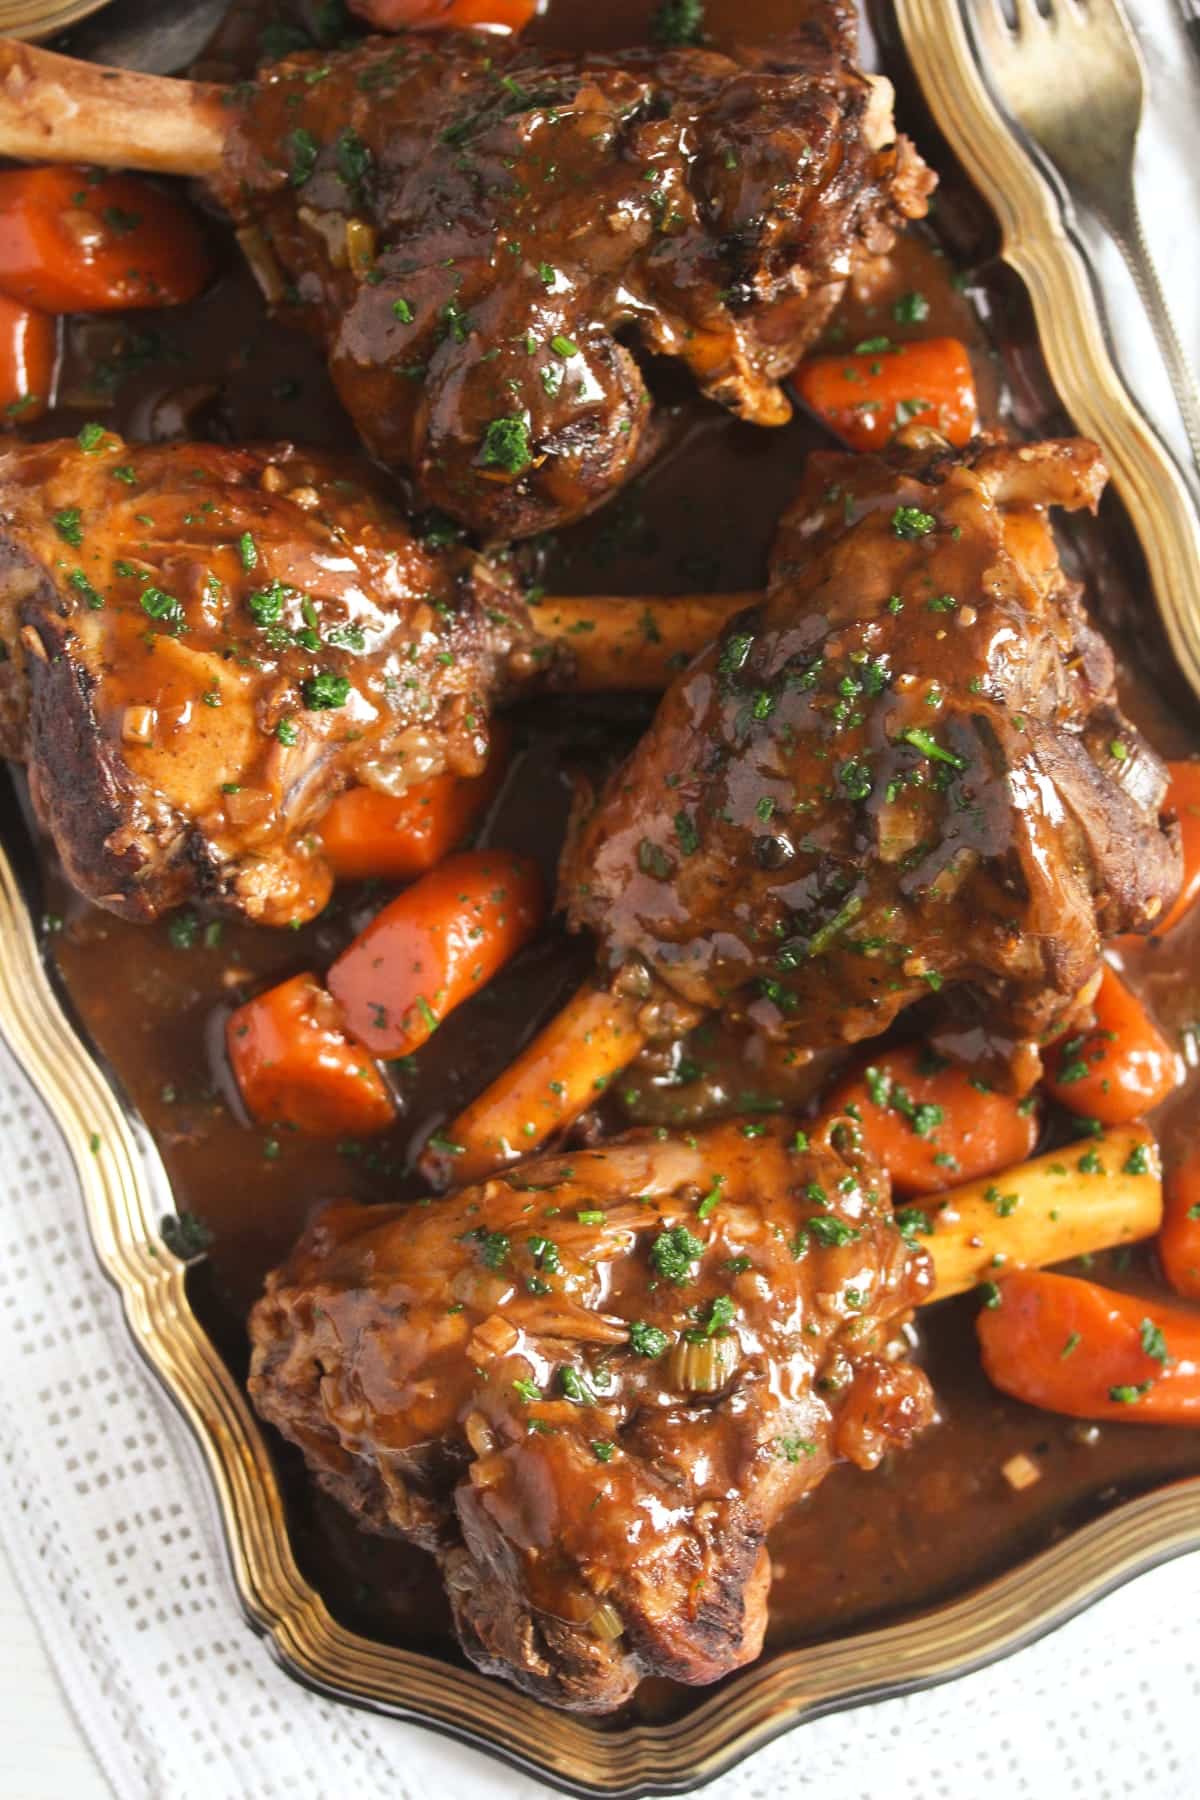 four shanks of lamb with carrots and gravy on a platter.